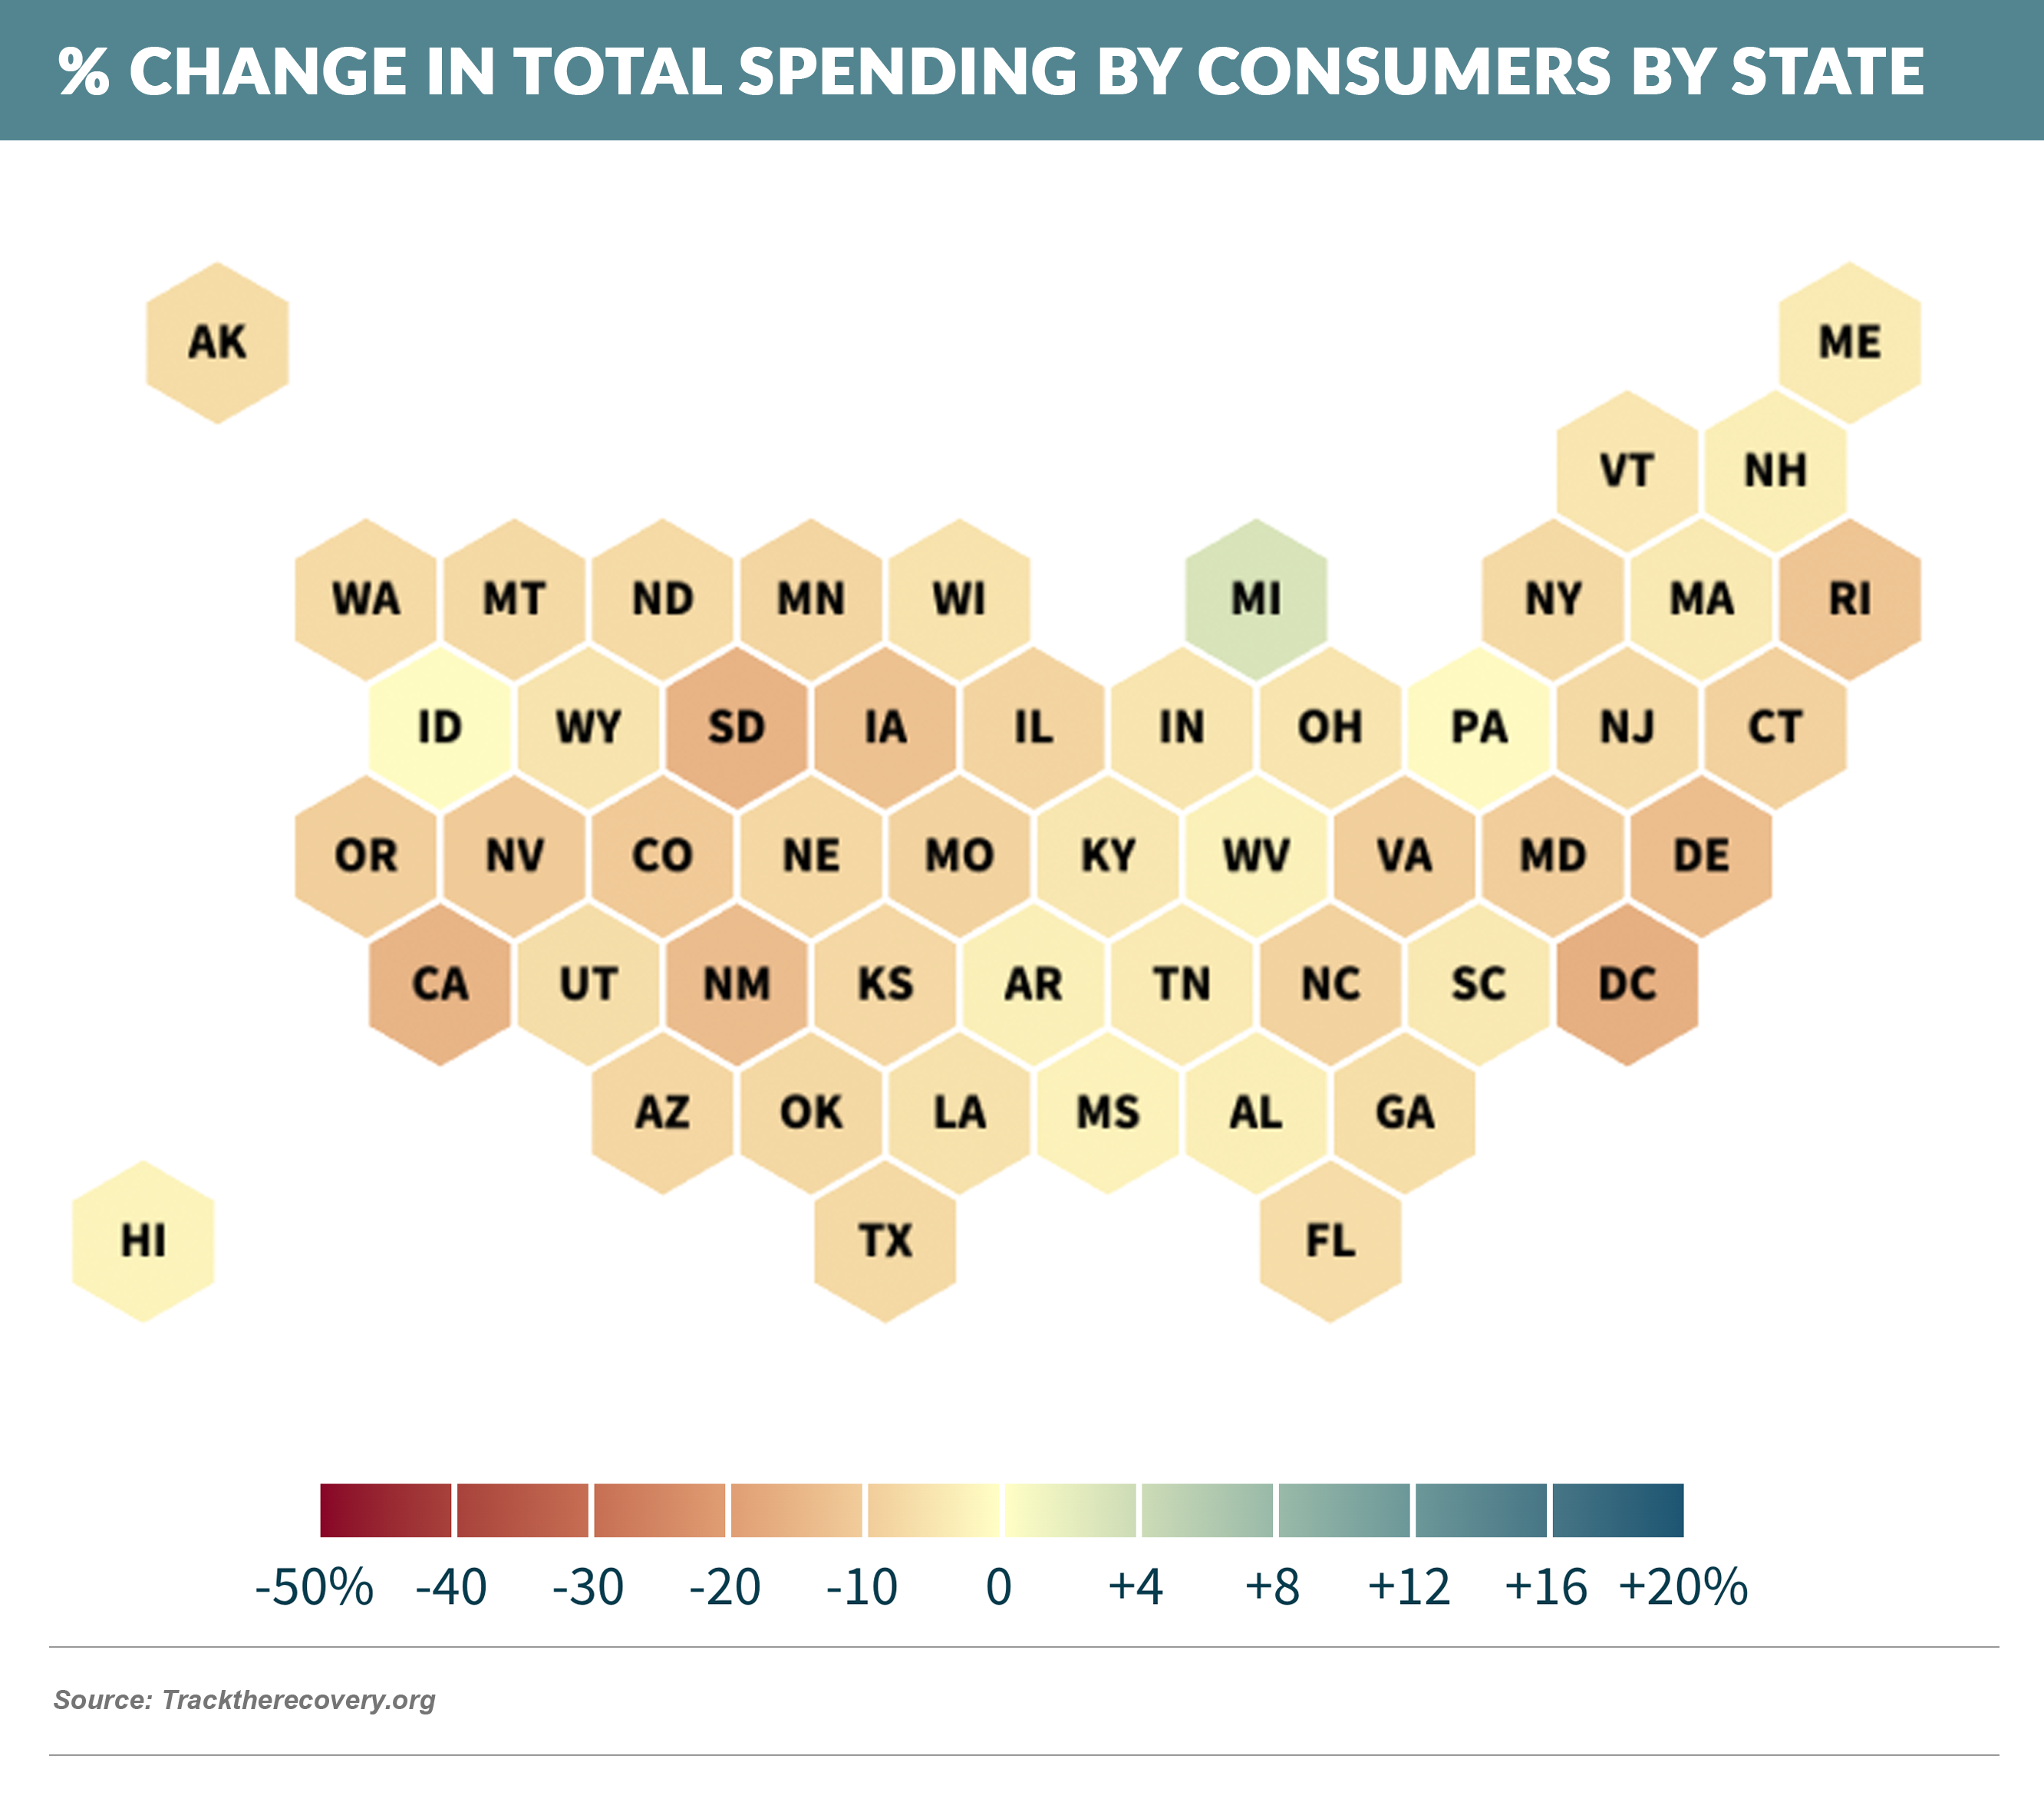 % Change in Total Spending by Consumers BY STATE